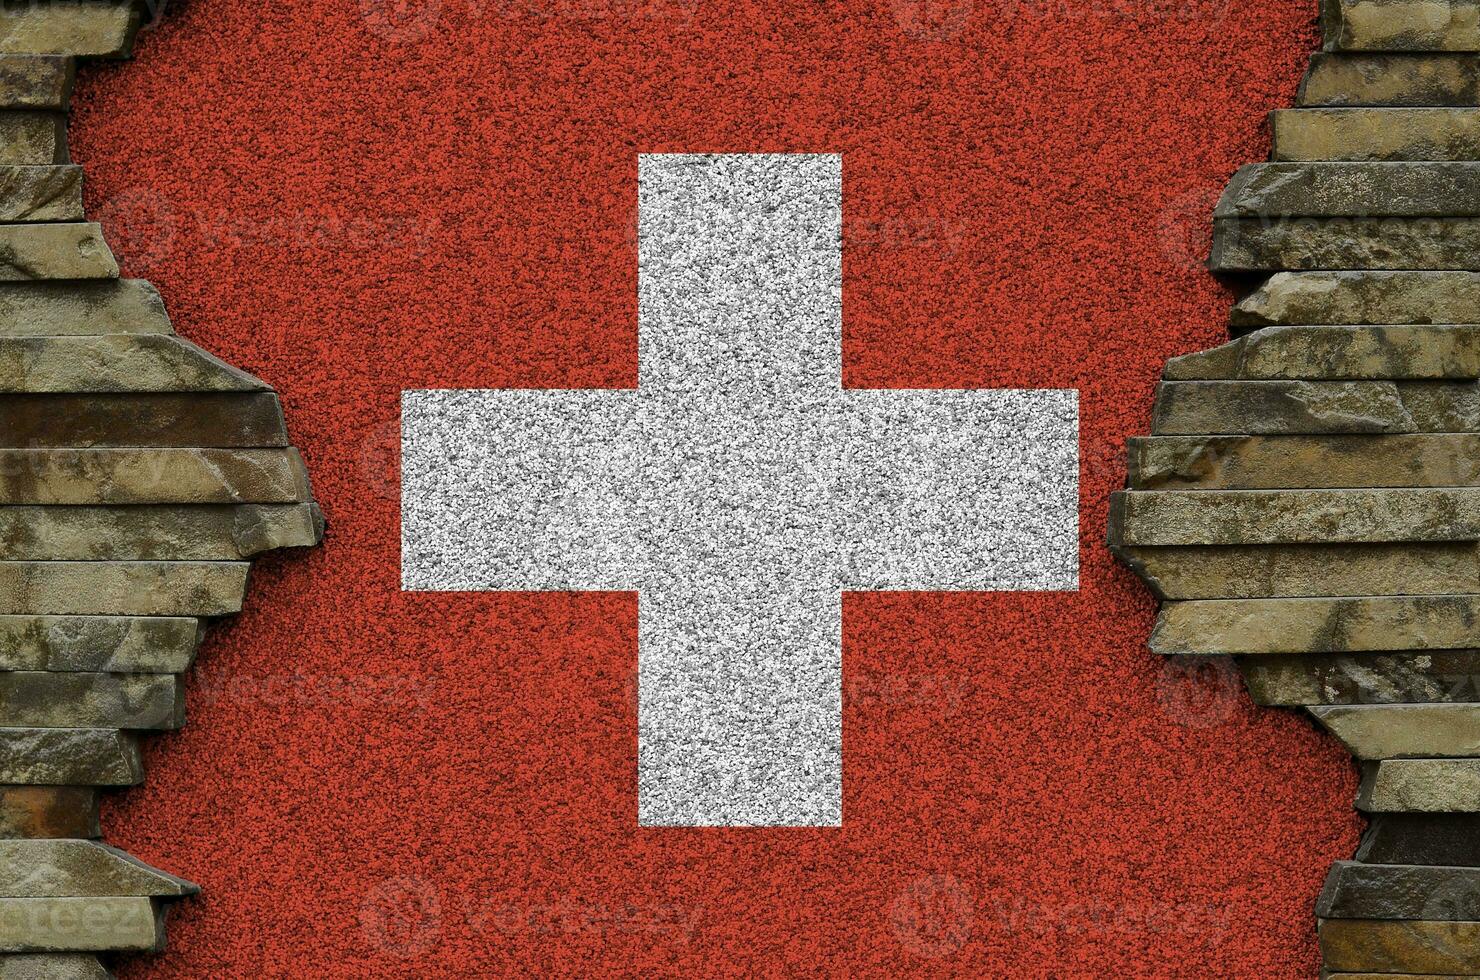 Switzerland flag depicted in paint colors on old stone wall closeup. Textured banner on rock wall background photo